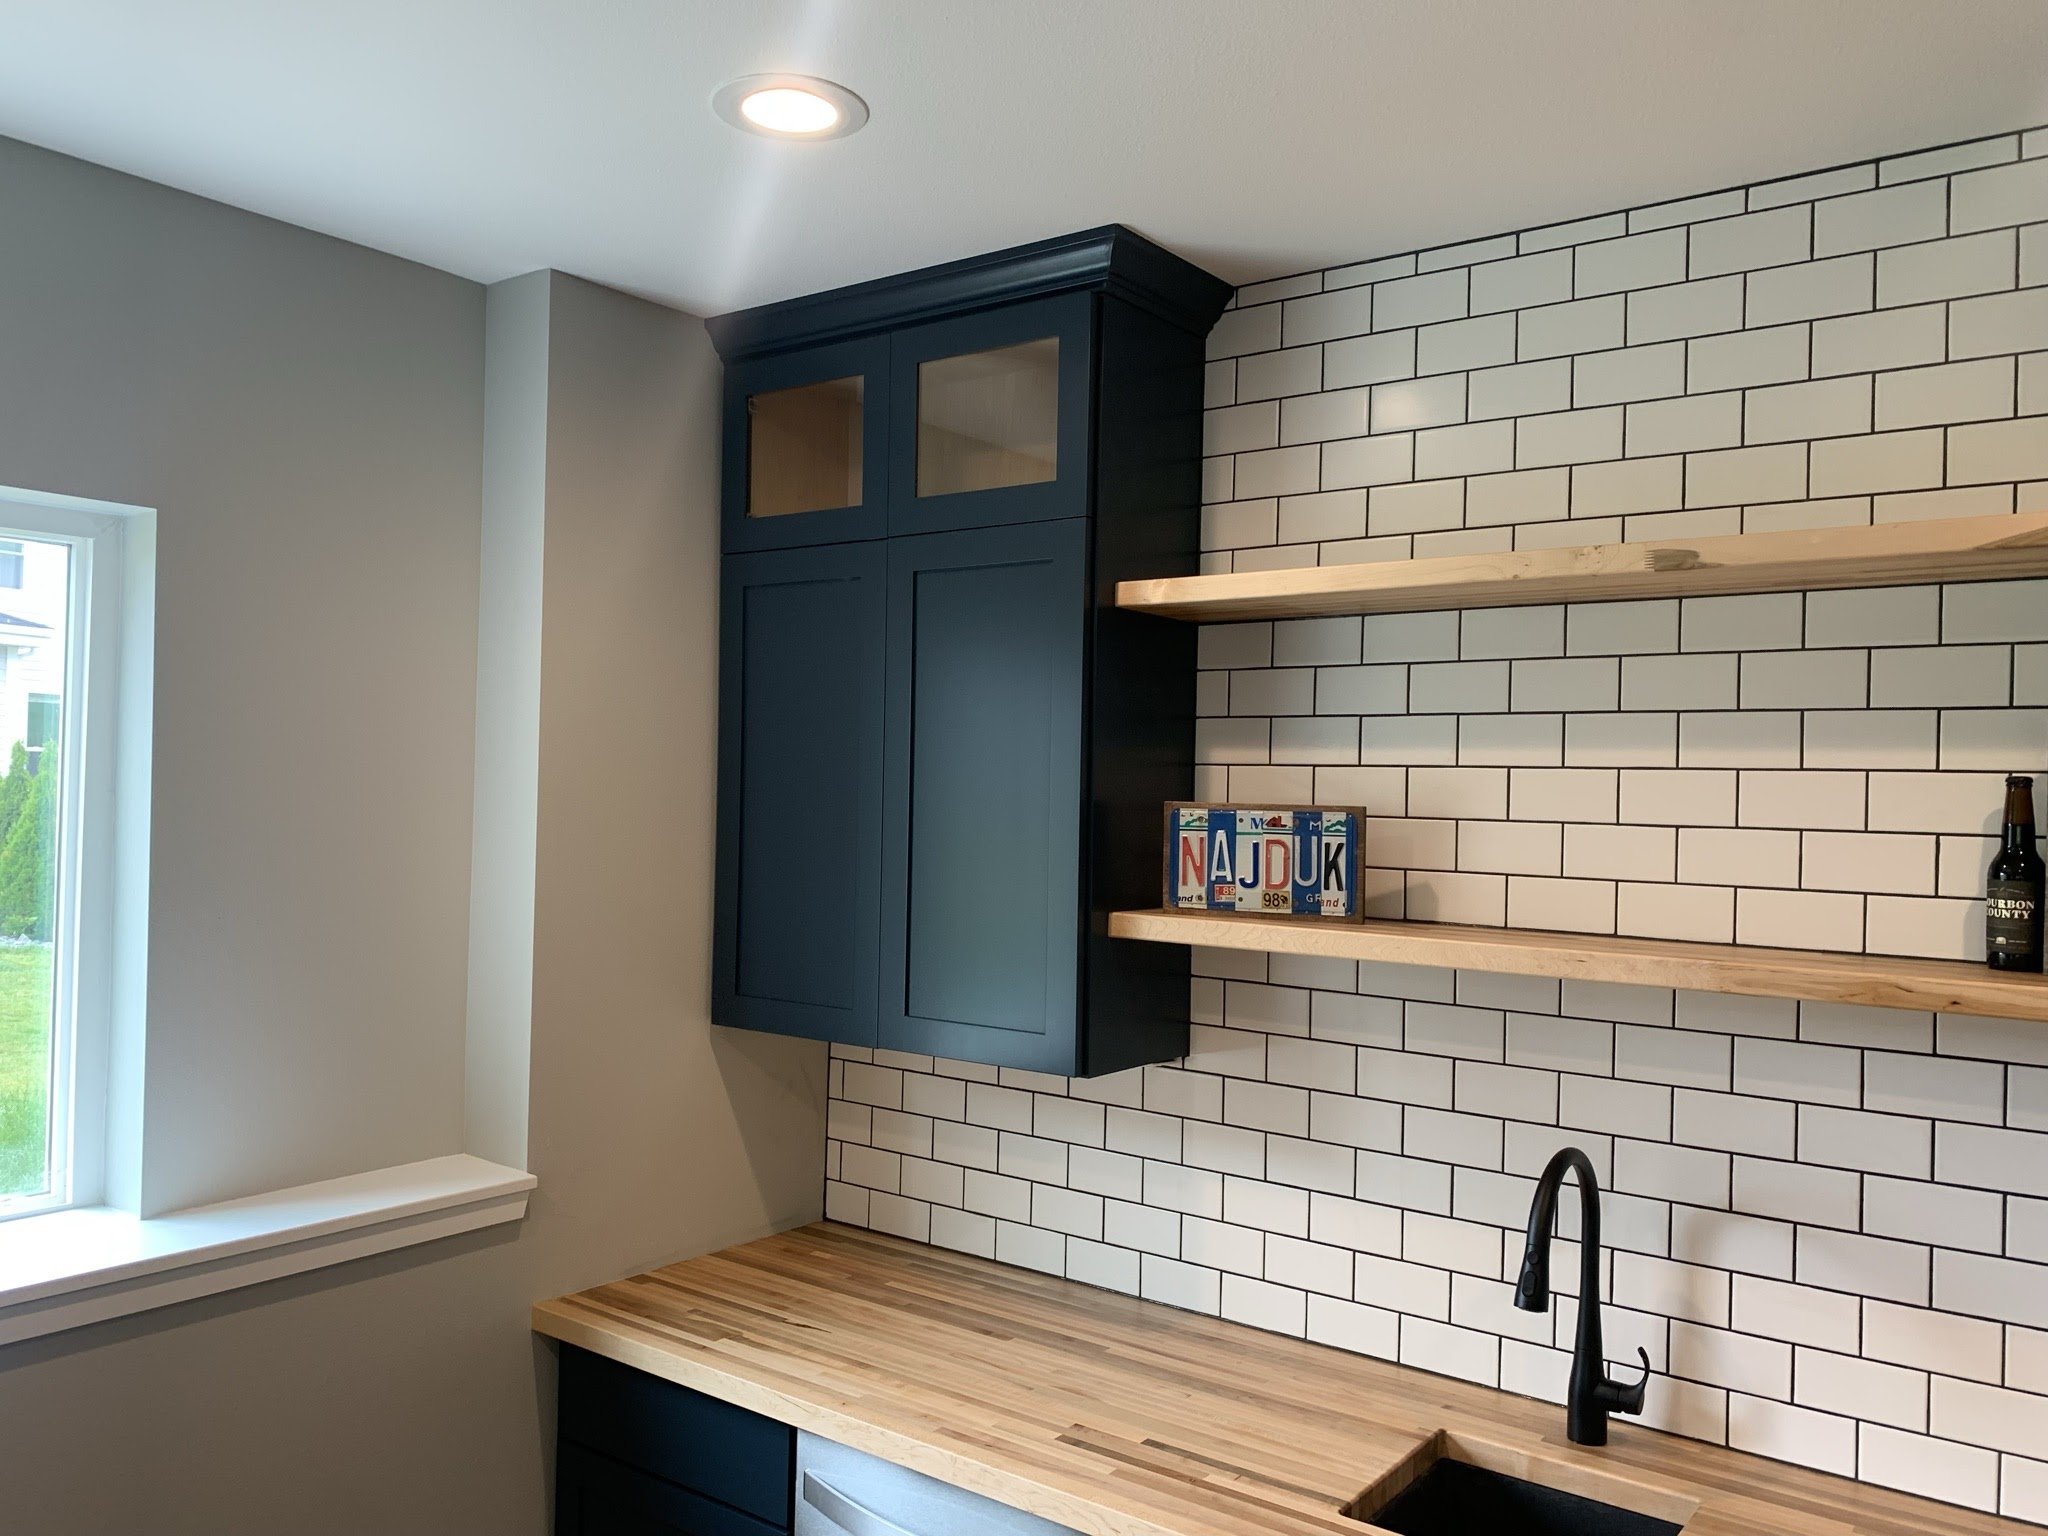 Built in shelves with subway tile